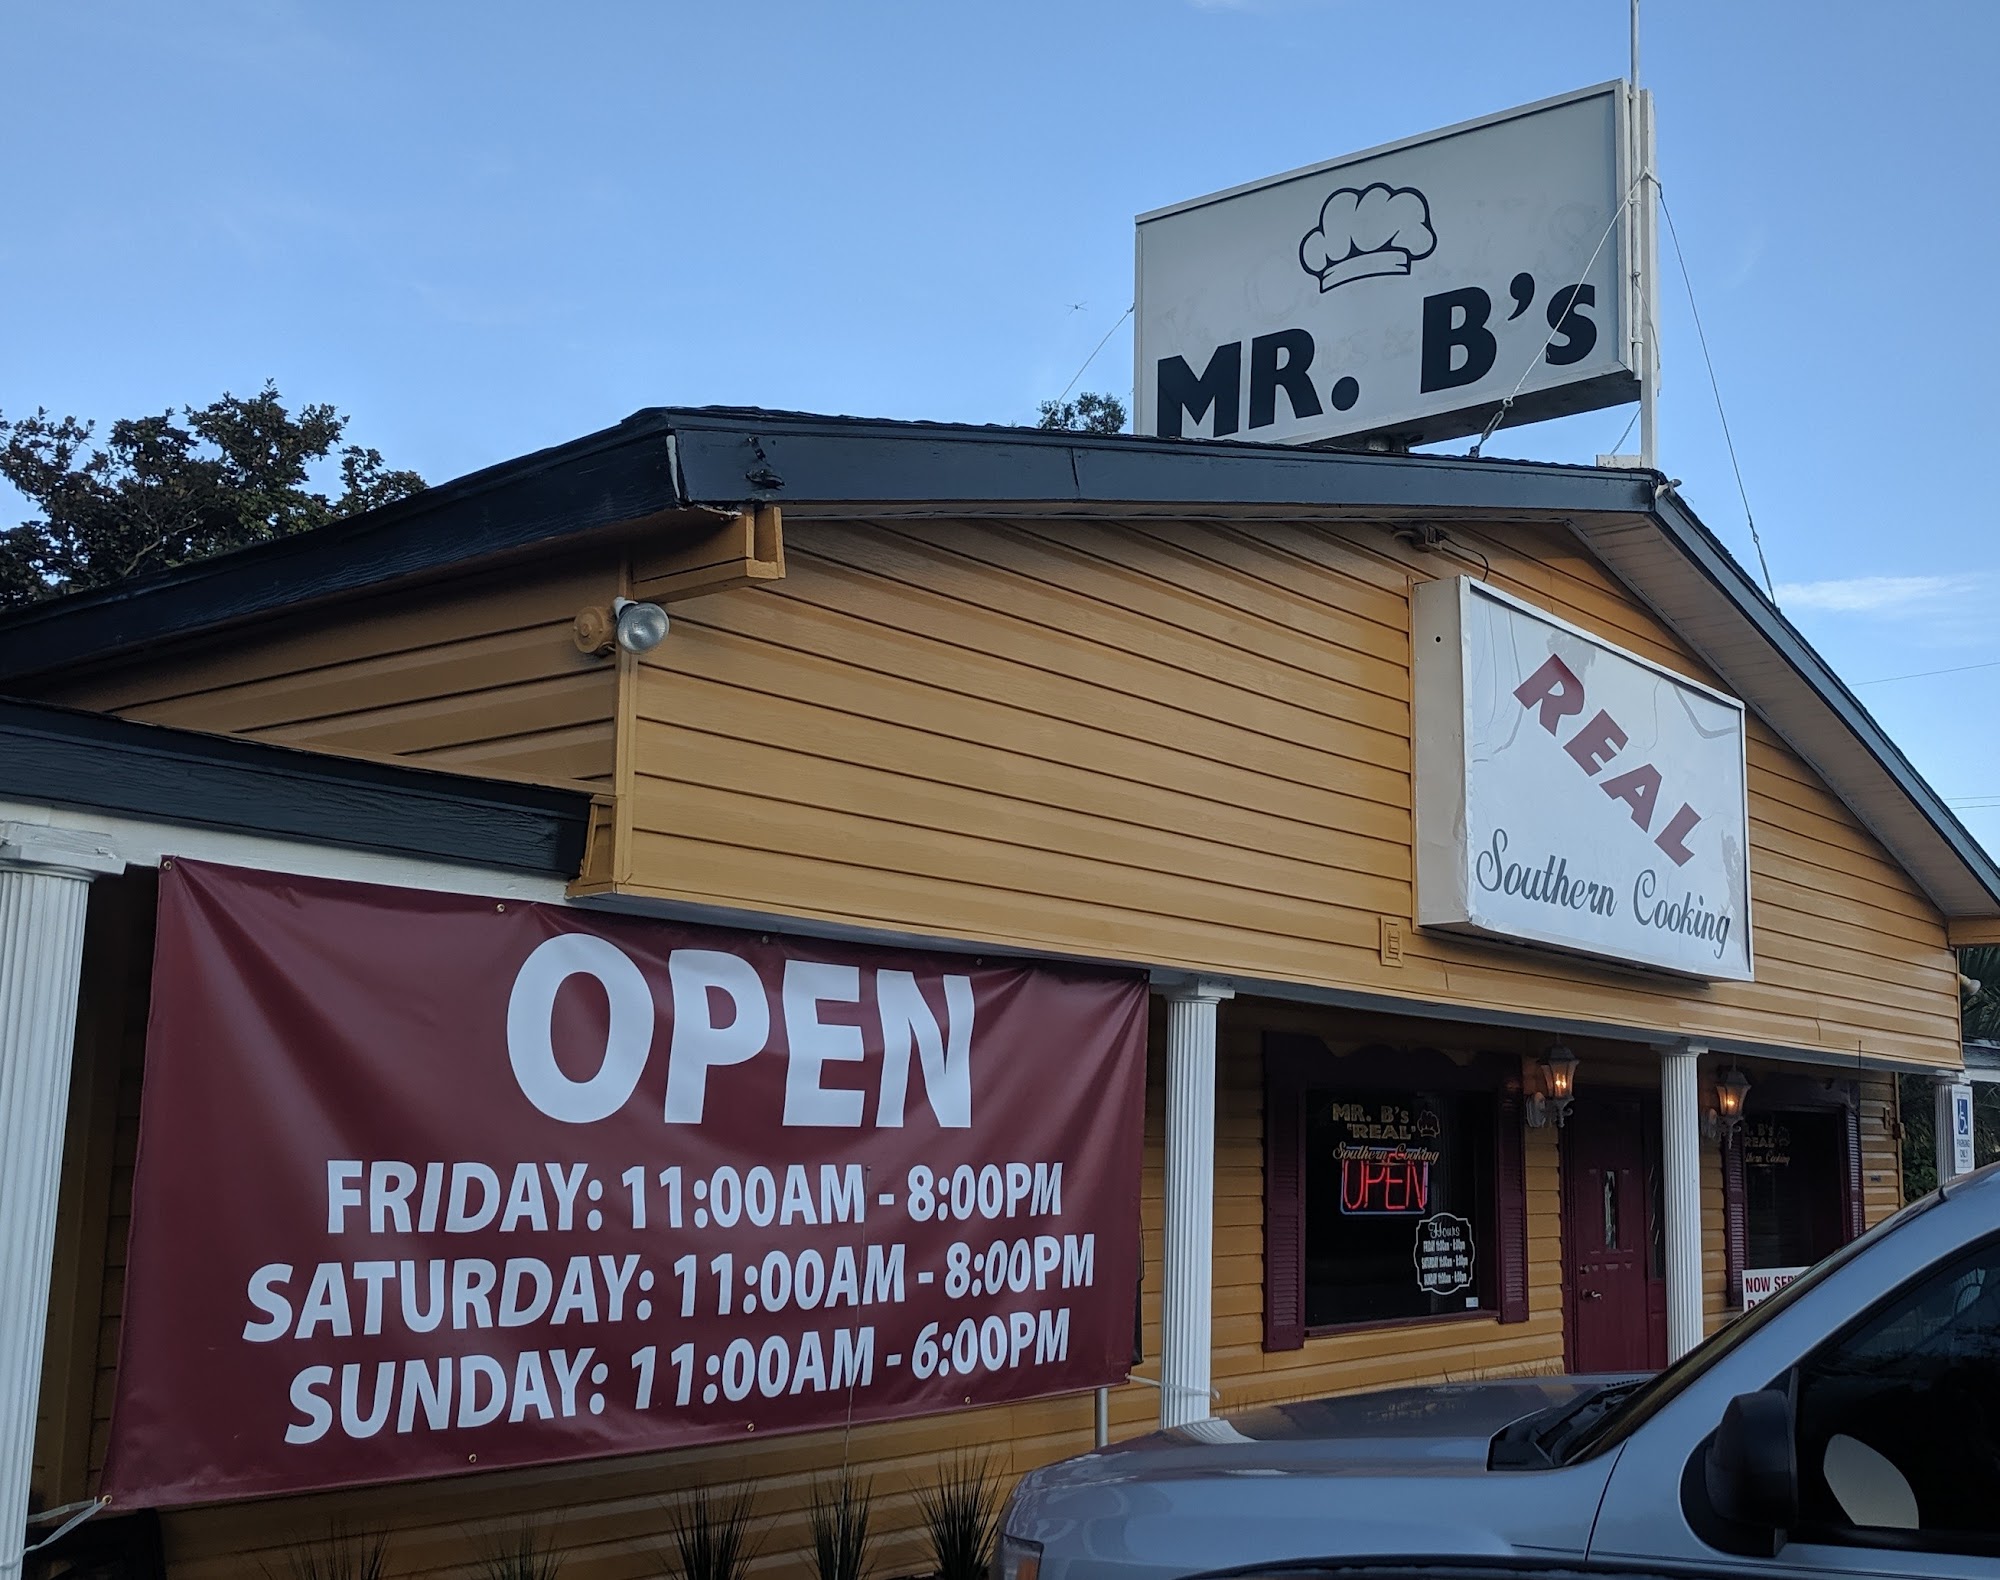 Mr. B’s Real Southern Cooking